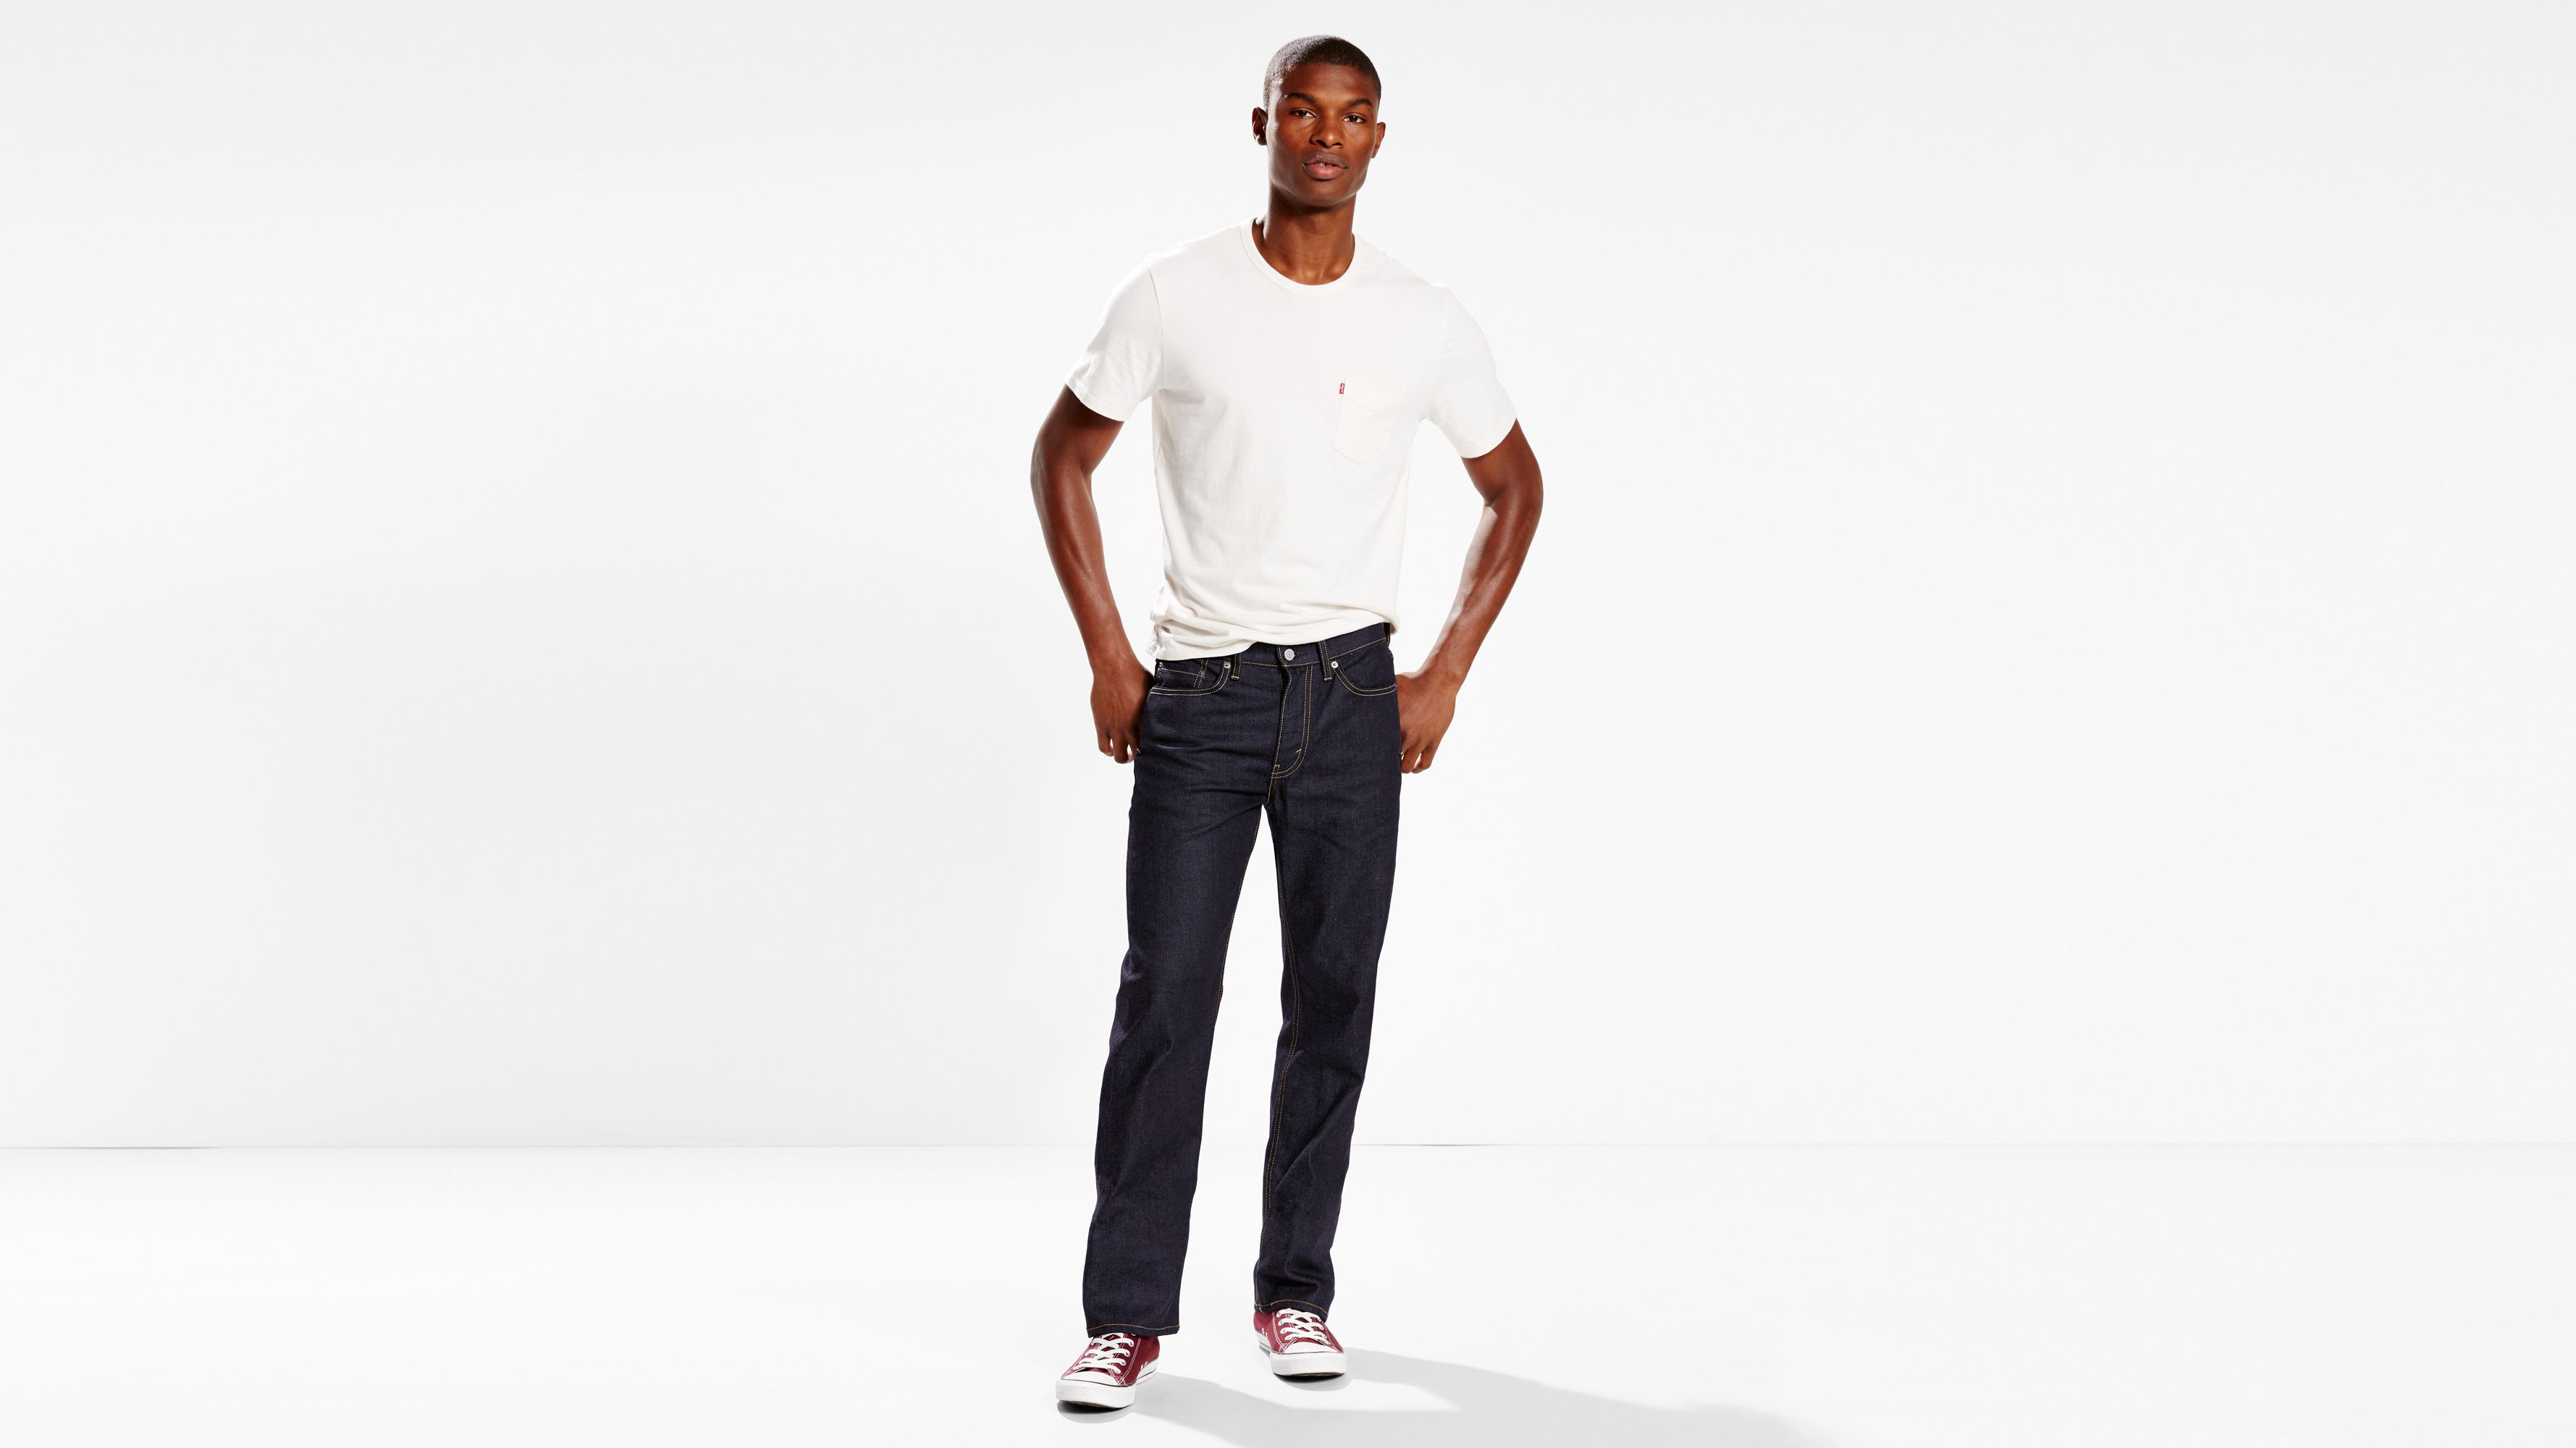 514 straight fit stretch jeans